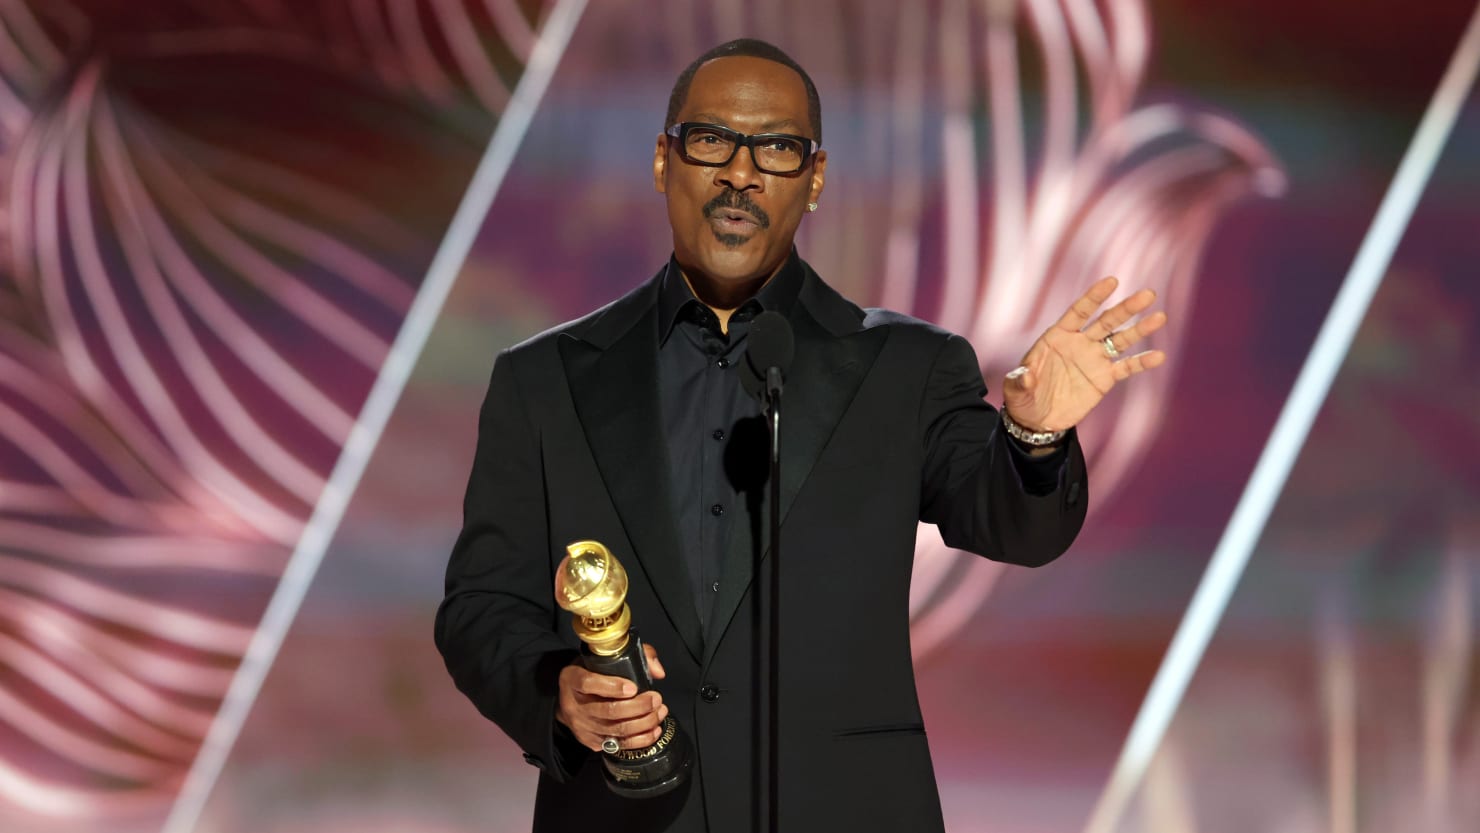 Eddie Murphy Delivers Perfect Will Smith Joke at Golden Globes